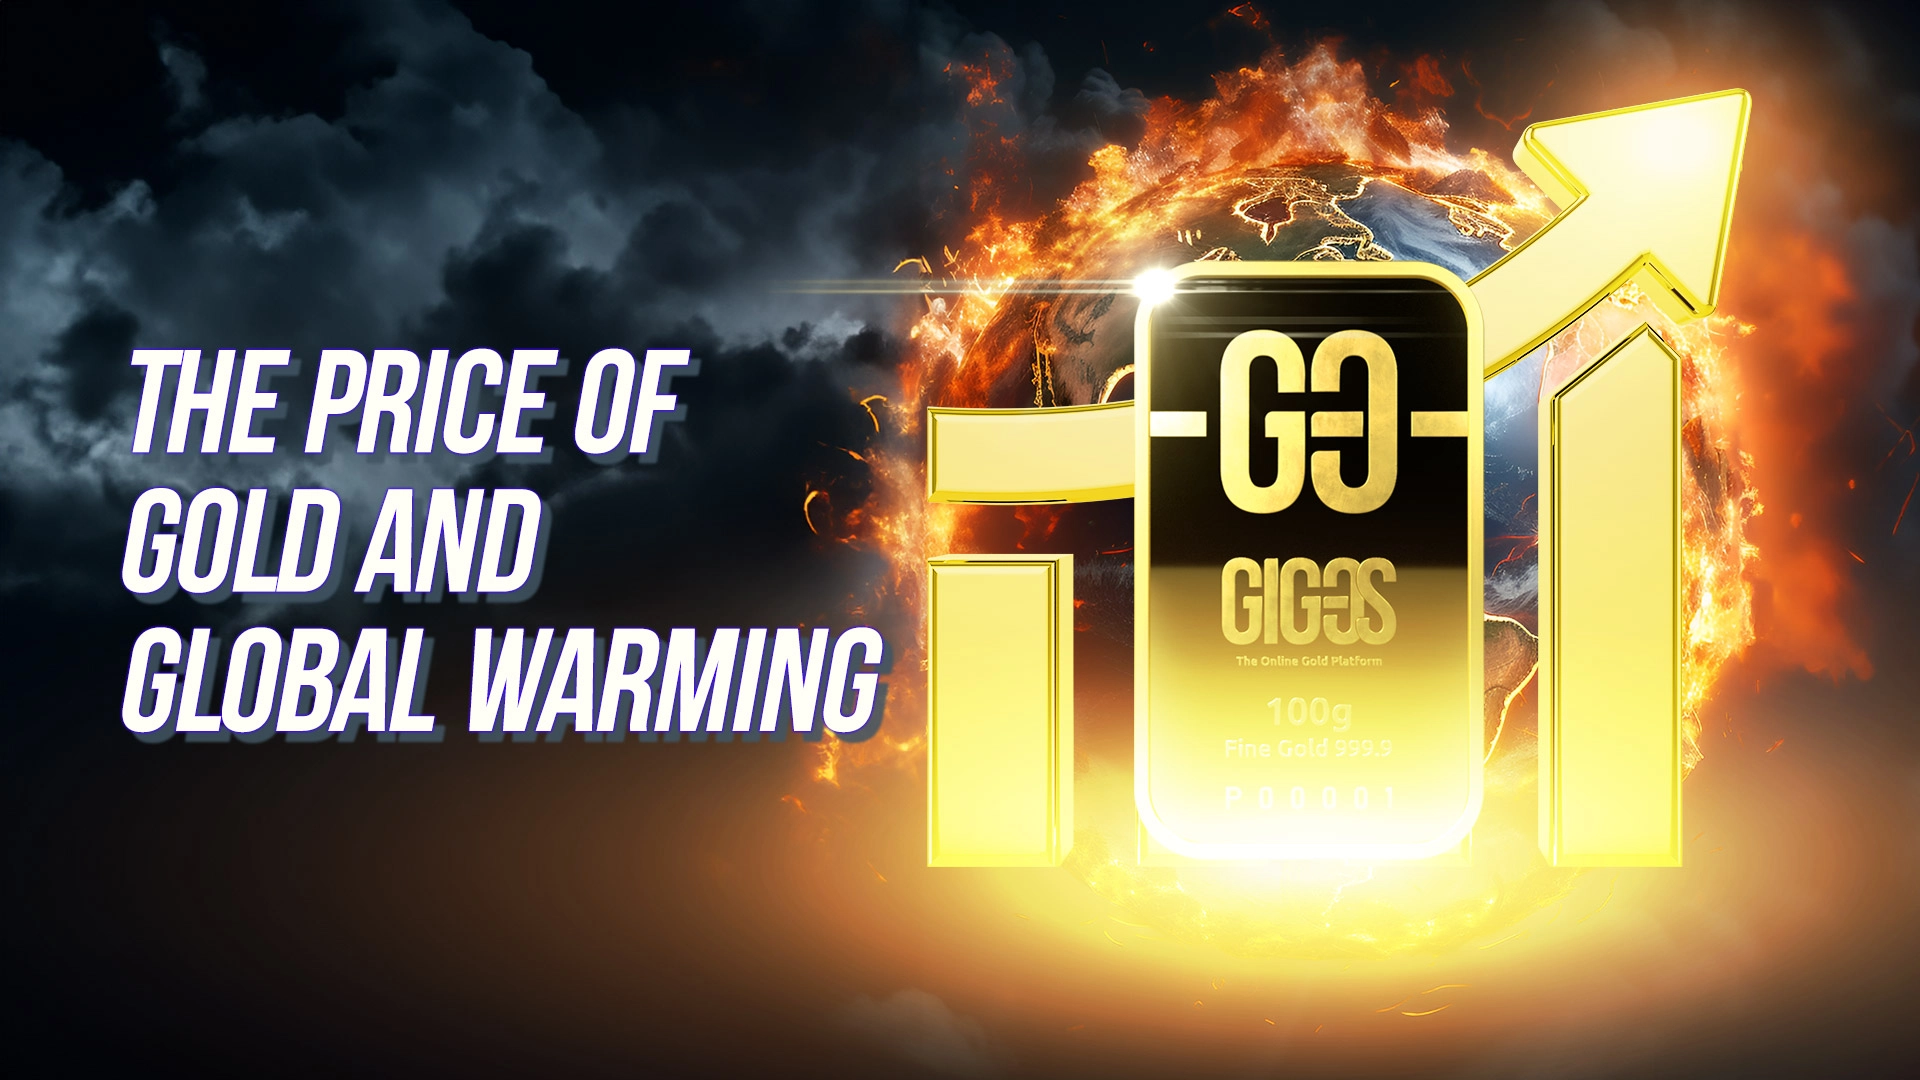 [VIDEO] How does climate change affect the price of gold?